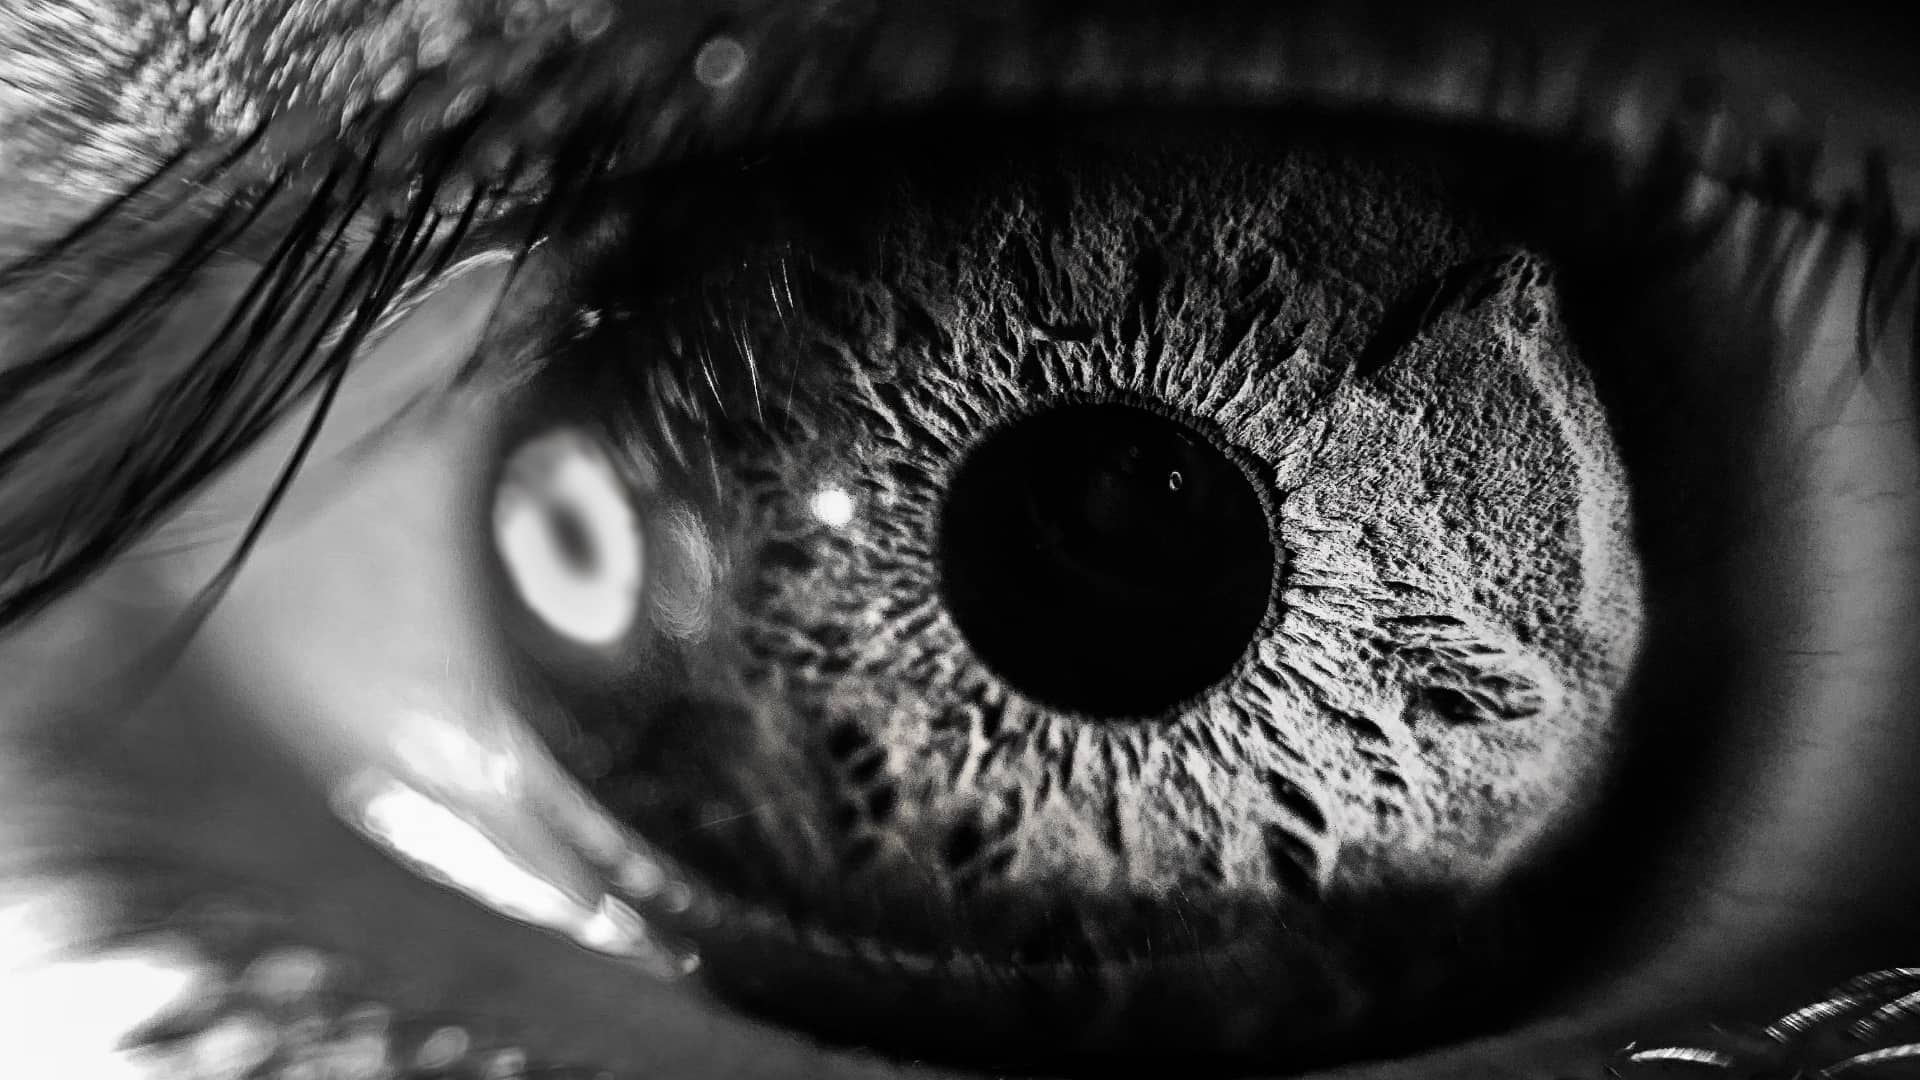 Closeup of a person's eye, focused on the iris